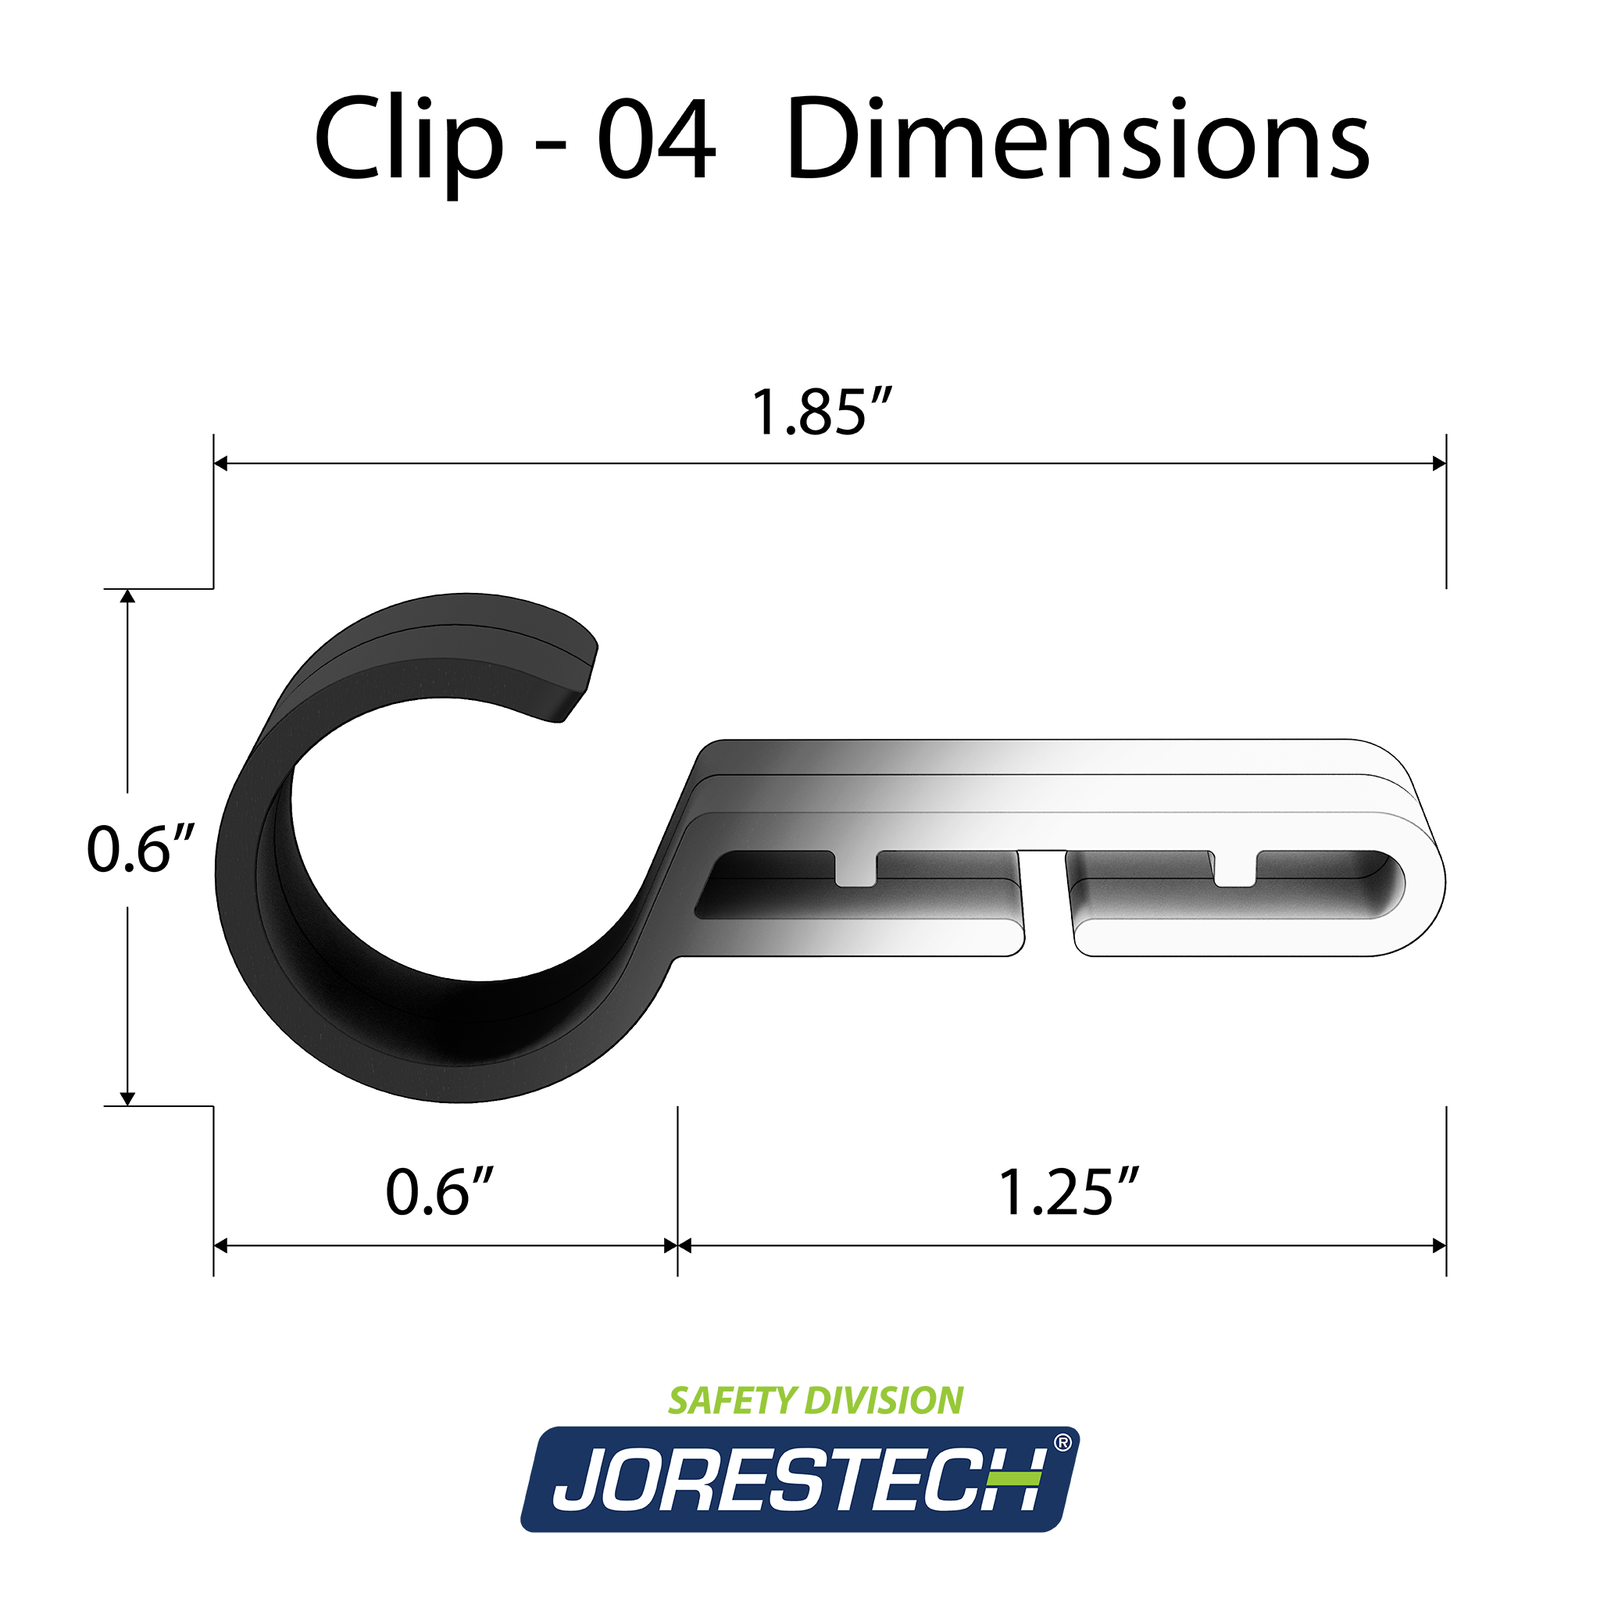 Show the dimensions of the JORESTECH hard hat headlamp clip. The length of the clip of 1.85